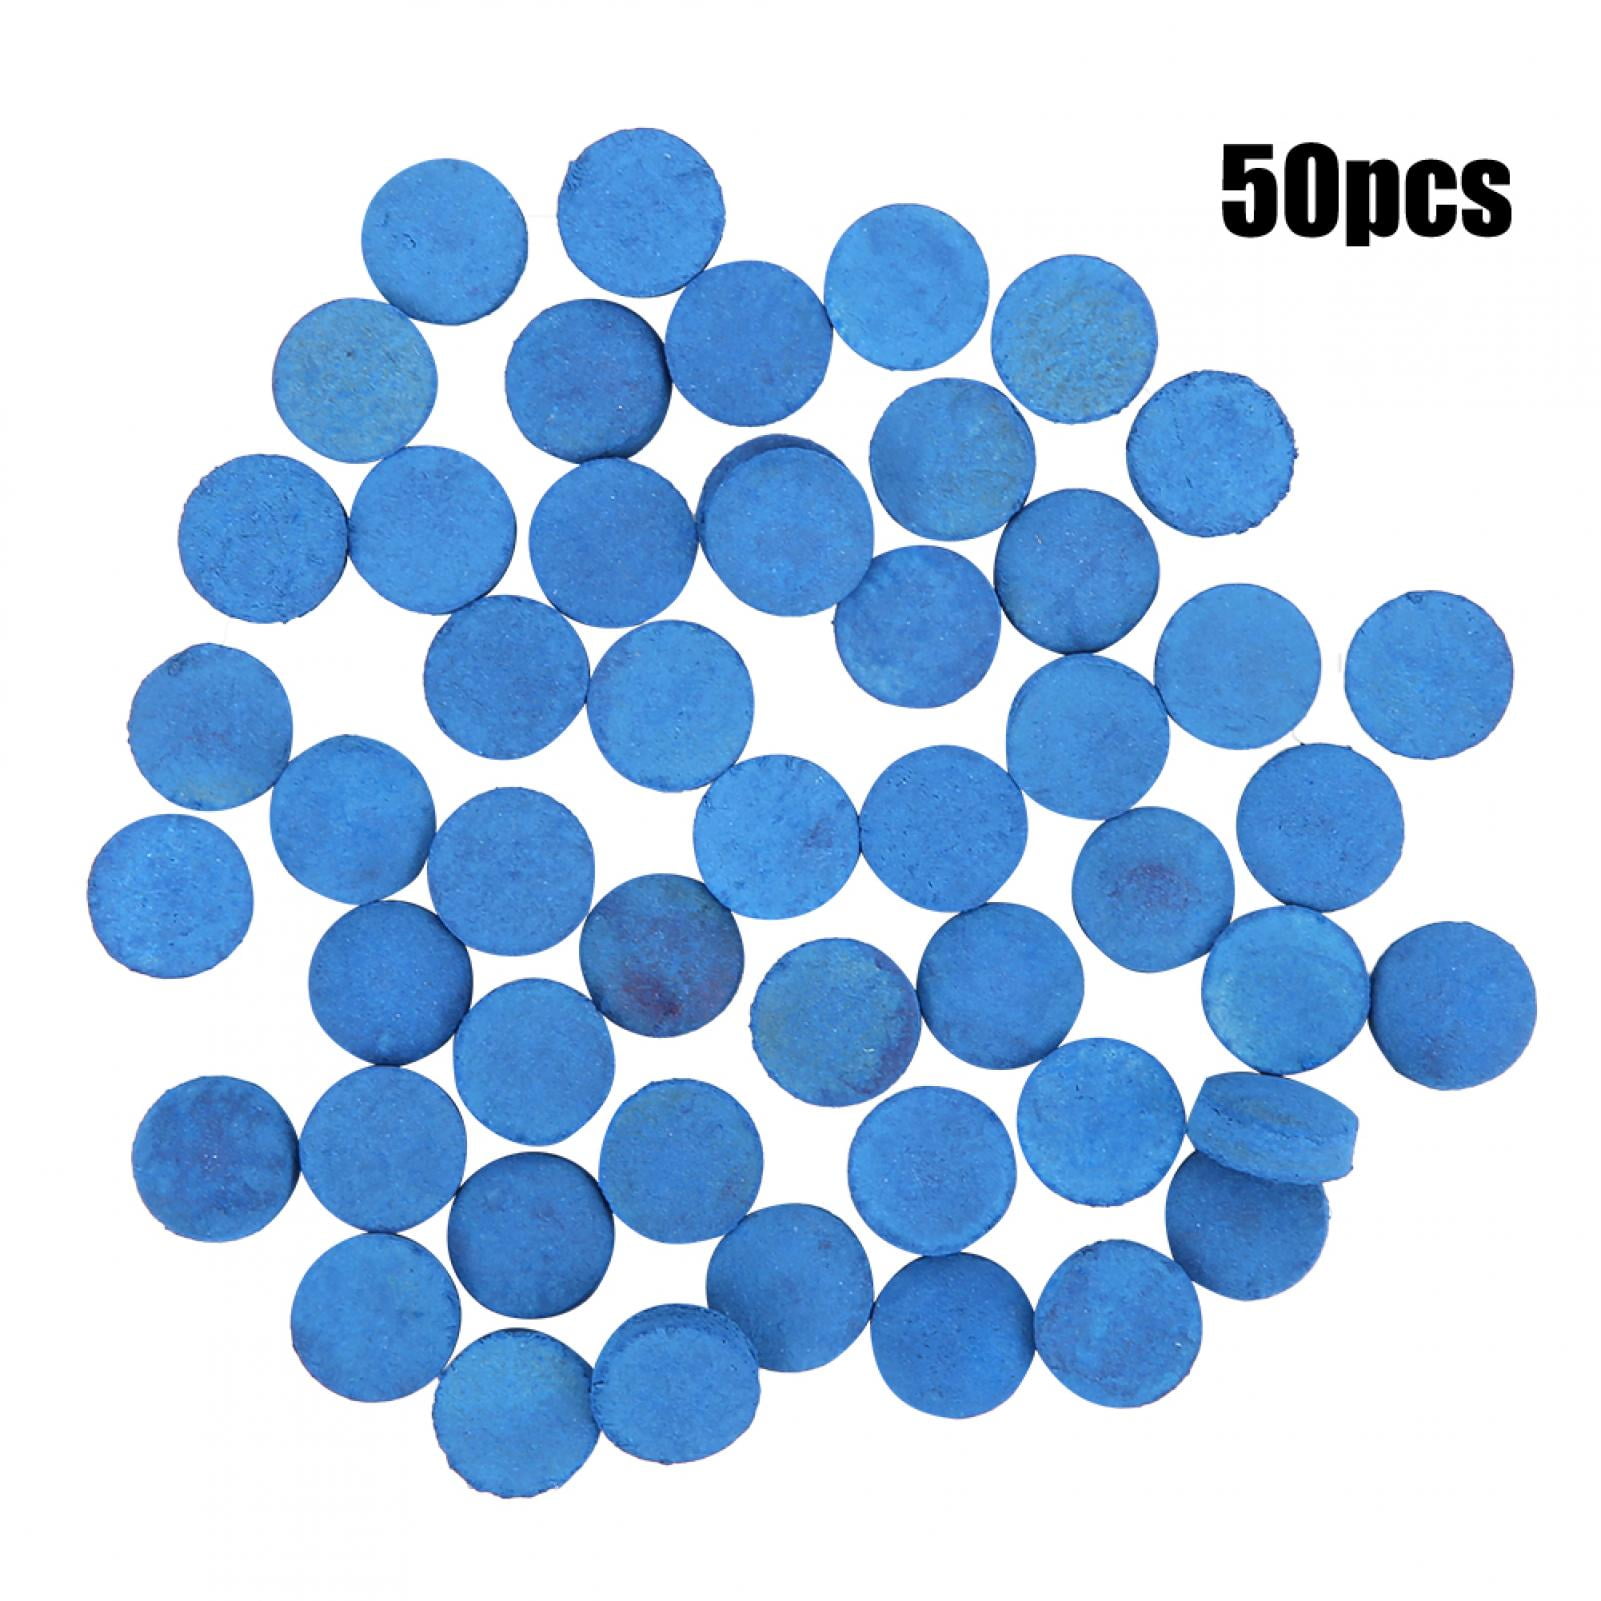 50PCS 9MM/10MM/13MM Cue Tips for Pool Cue Snooker Billiard Durable Accessories 